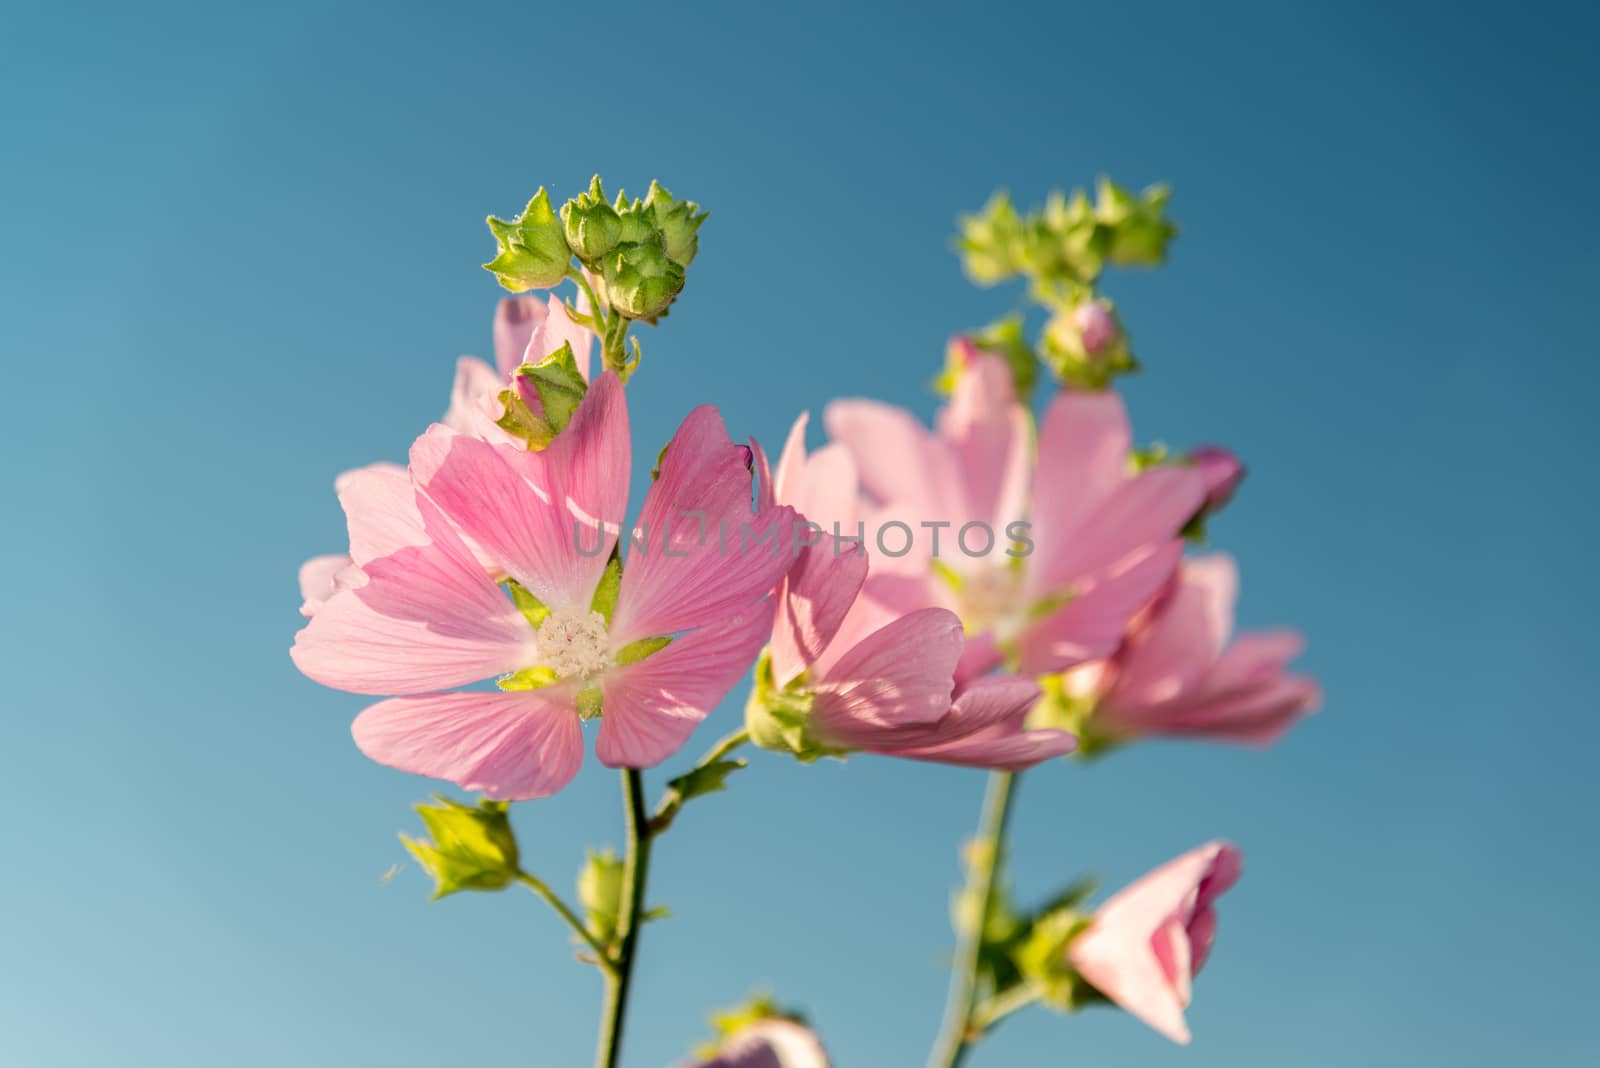 A Meadow pink Mallow against a blue sky